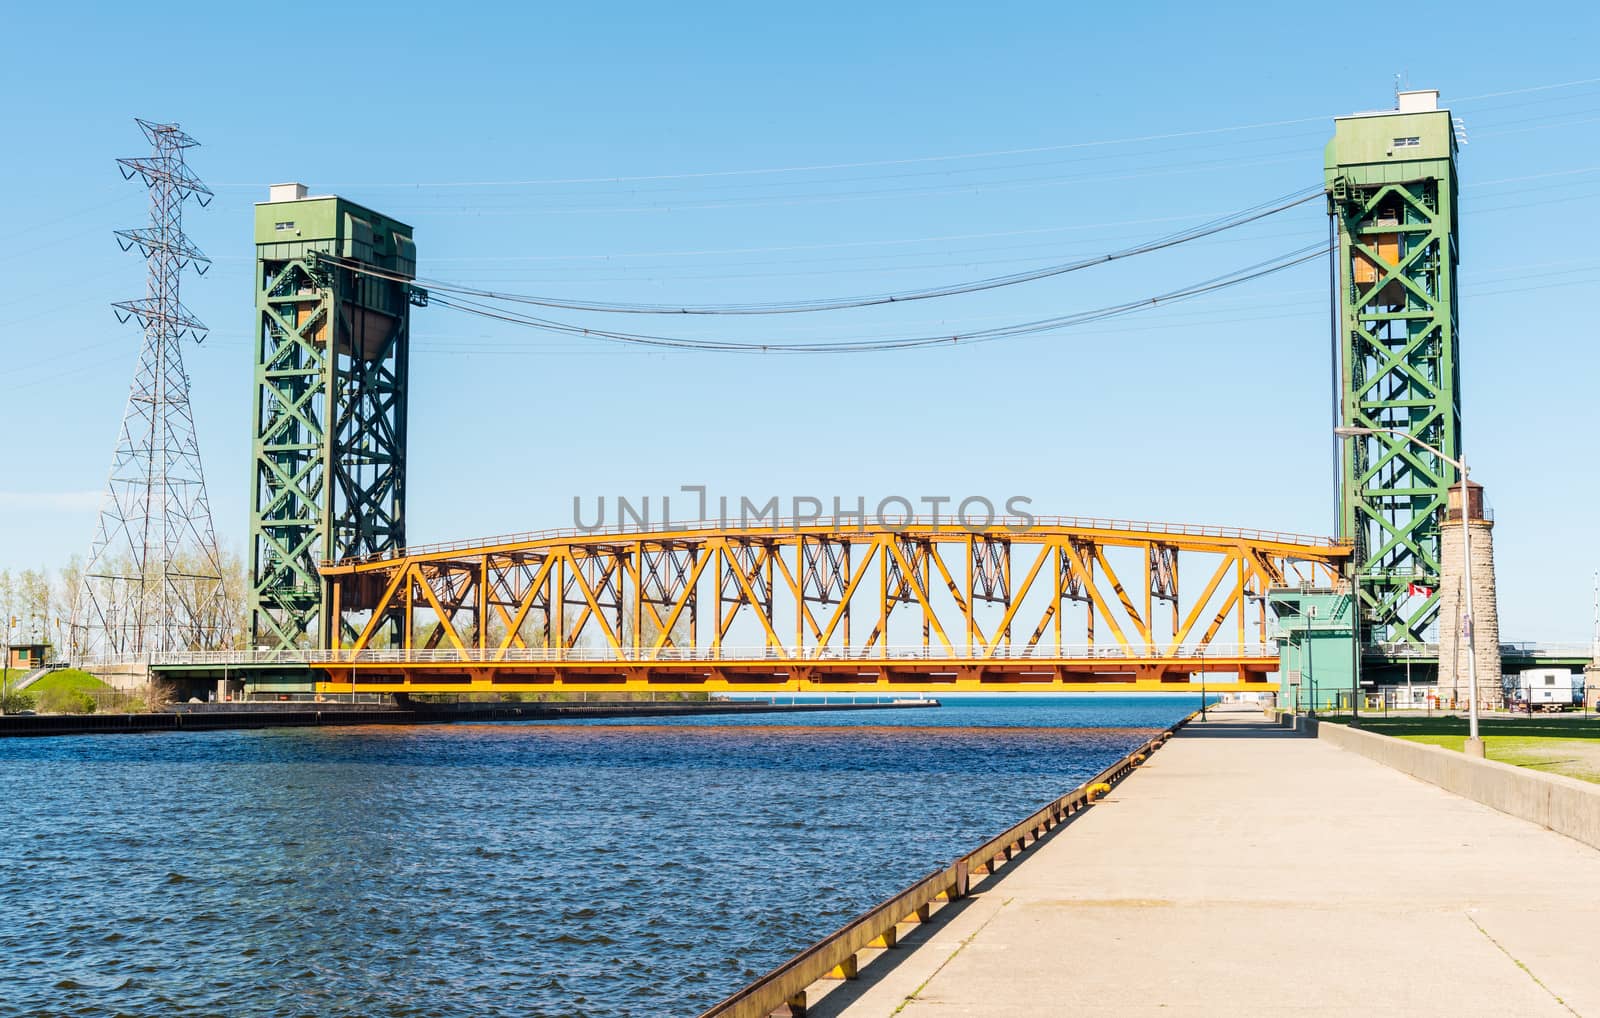 The Burlington Canal Lift Bridge is located on the western shore of Lake Ontario. The bridge spans the Burlington Canal that was opened in 1826. The bridge structure is a tower driven, vertical lift and moveable bridge. The lift span is 116 metres long, weighs 1,996 tonnes and has a vertical lift of 33.5 metres.